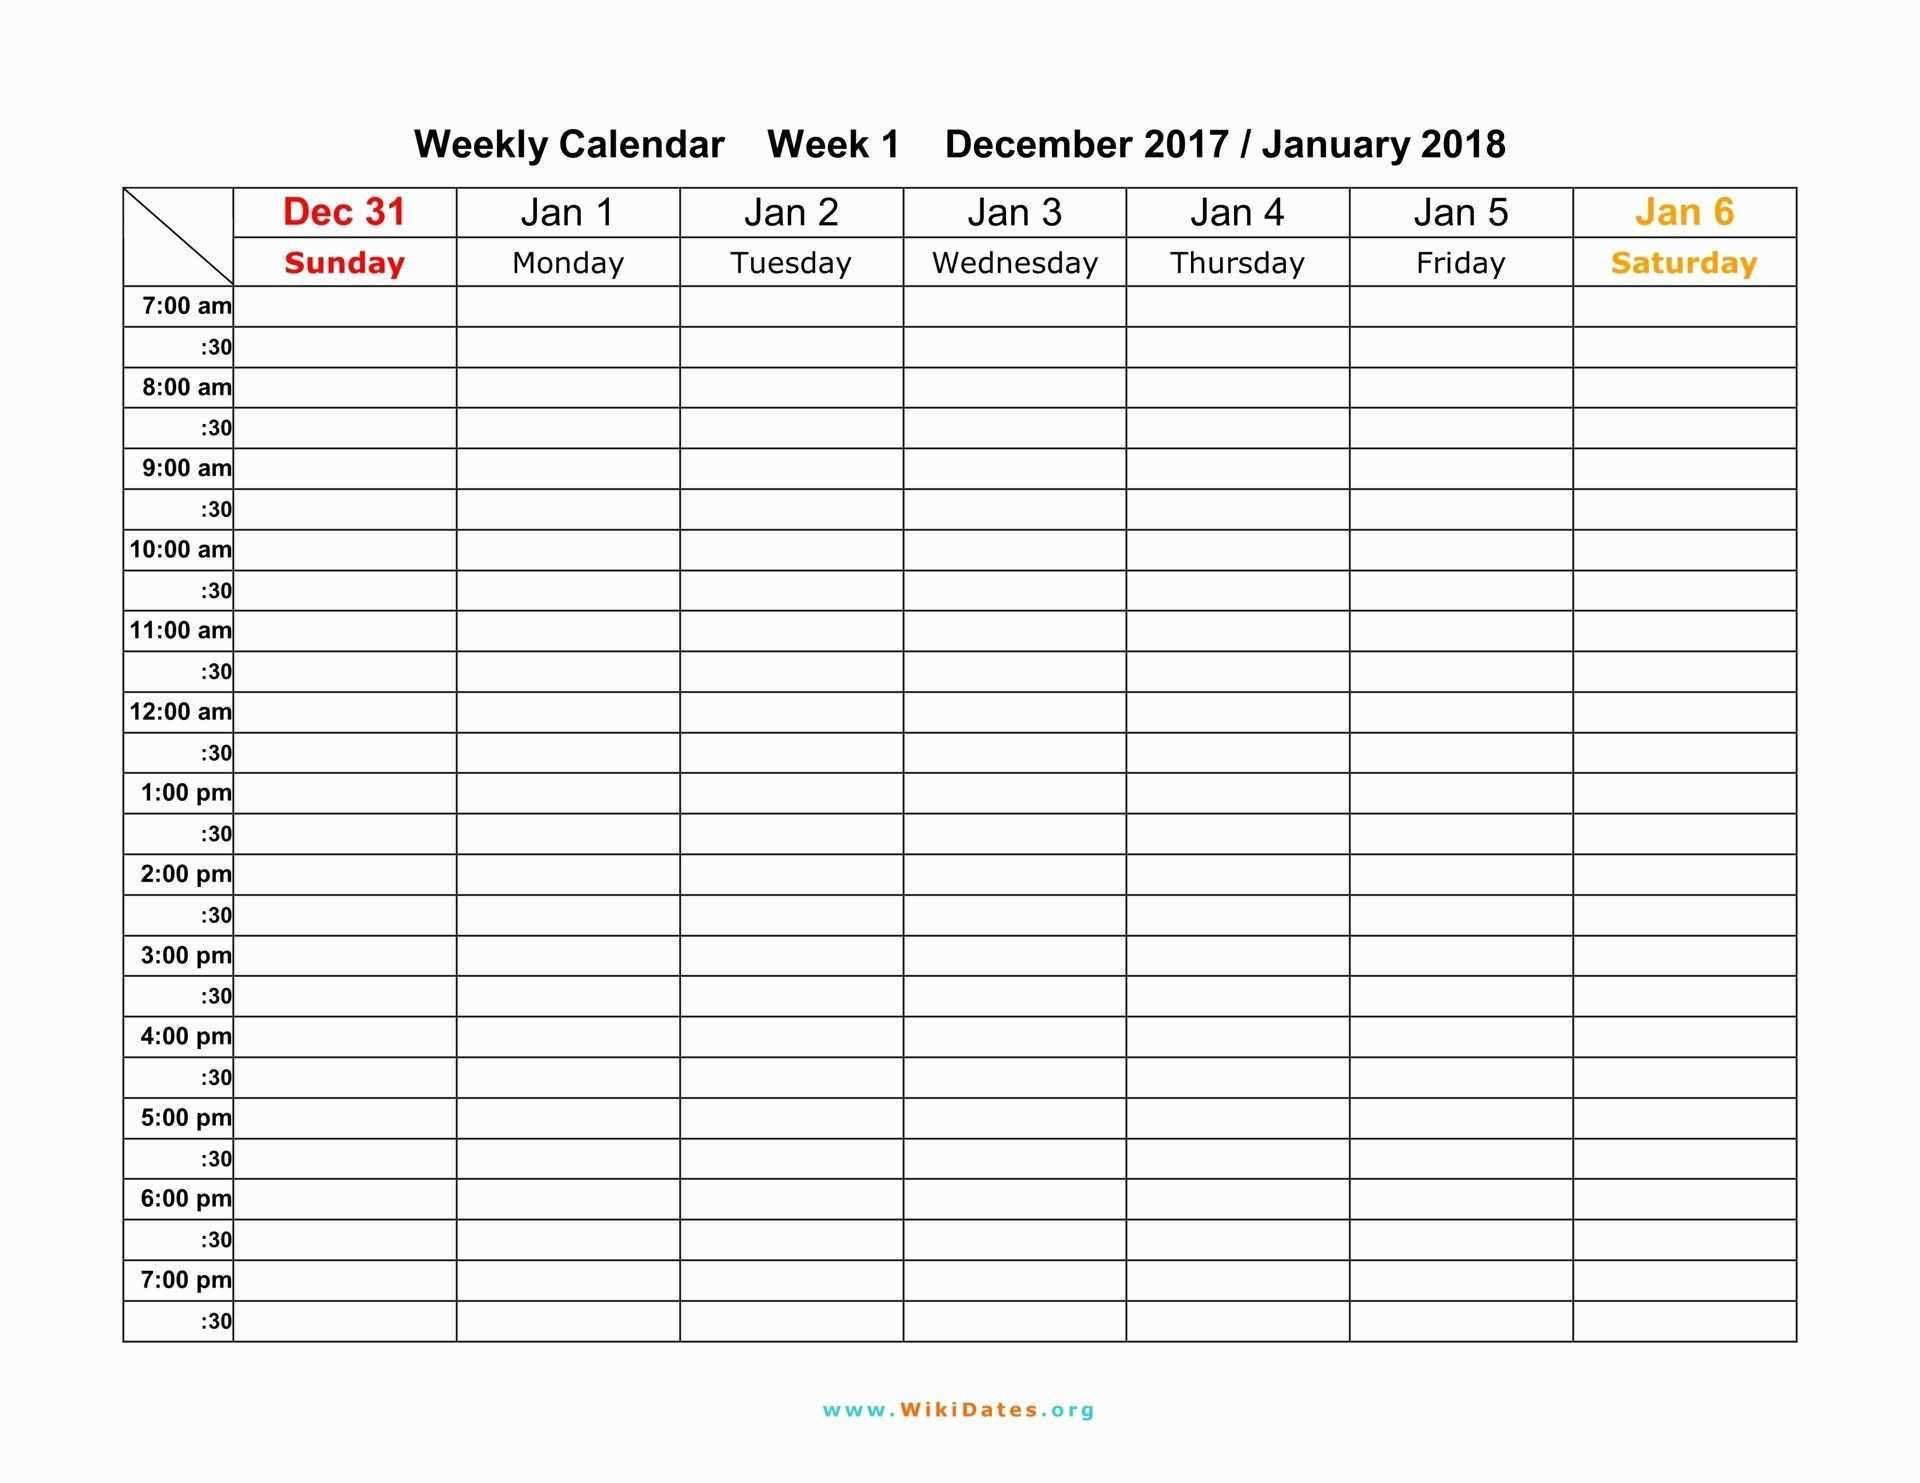 Weekly Work Schedule Template Free Awesome Weekly Calendar Download Weekly Calendar 2017 An In 2020 Weekly Calendar Template Work Week Calendar Daily Calendar Template